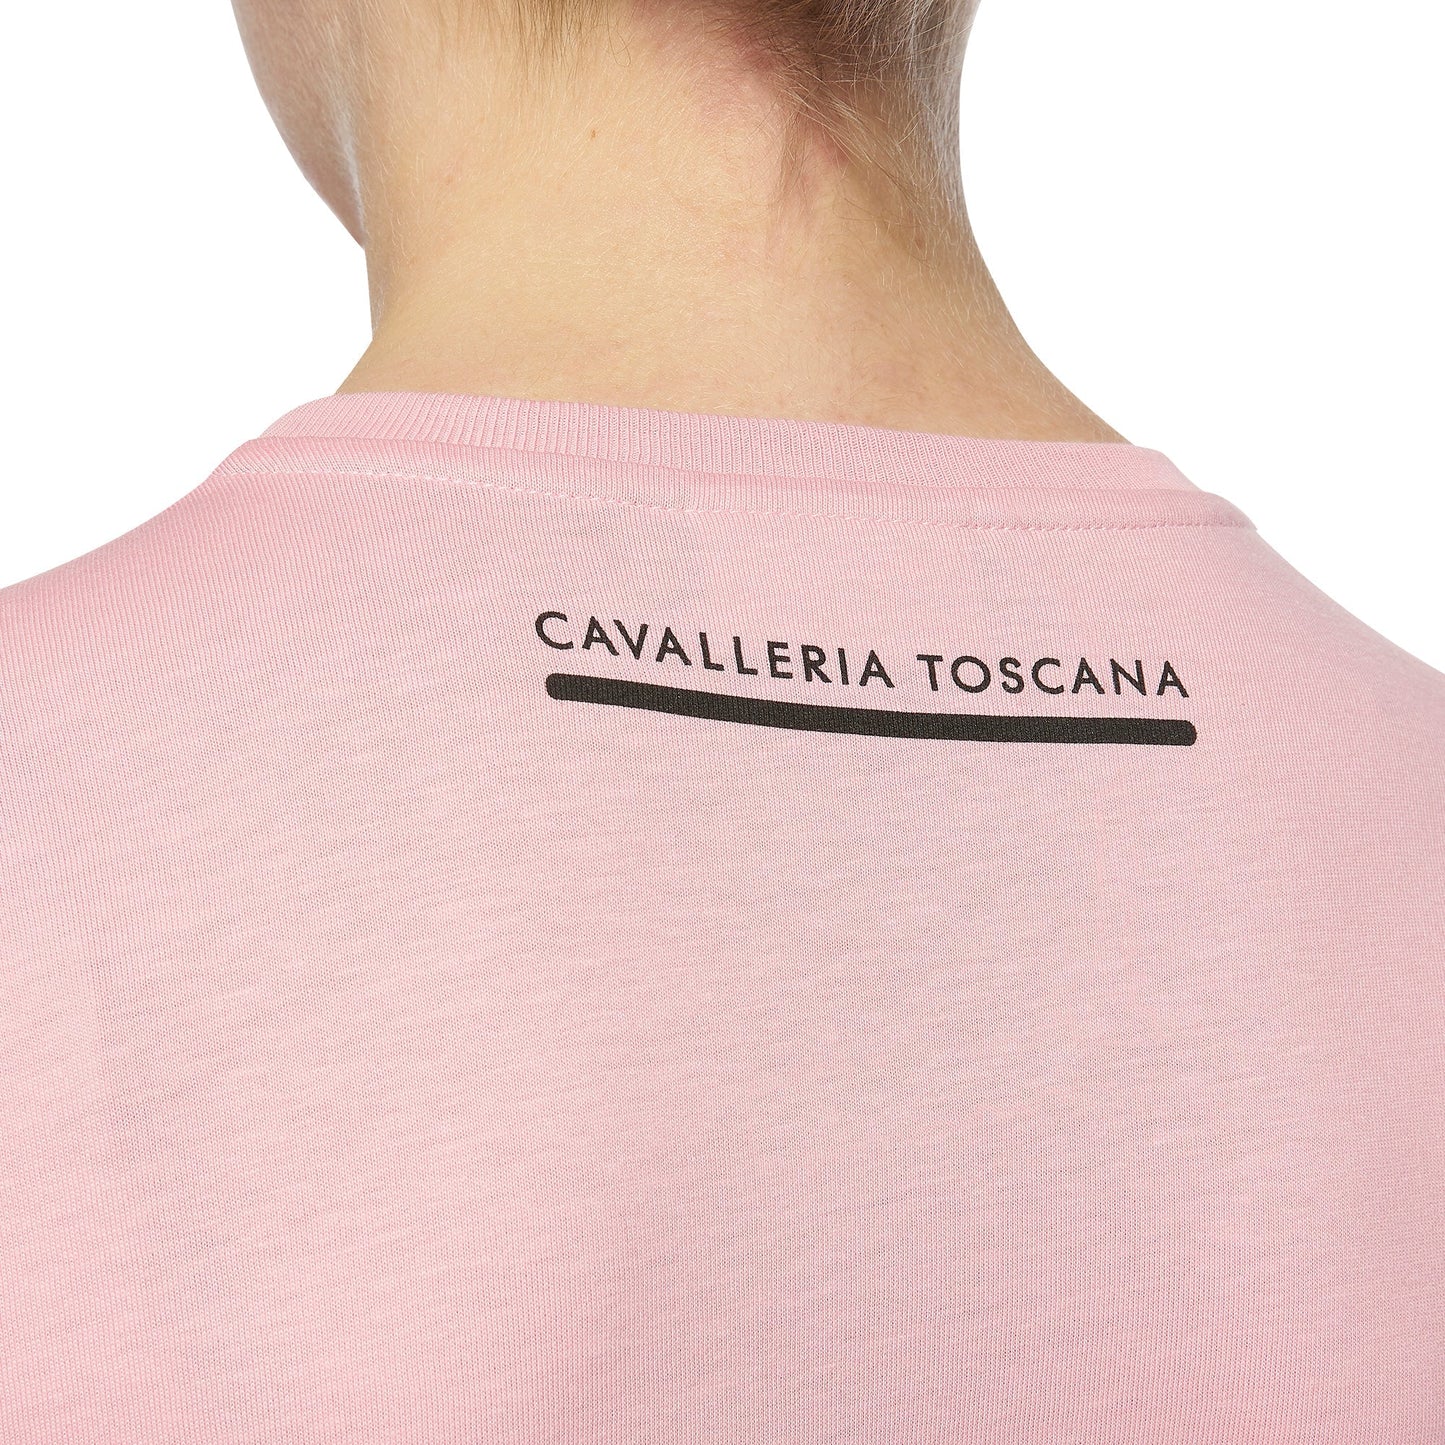 Cavalleria Toscana Girls Love Horses - Girls-Trailrace Equestrian Outfitters-The Equestrian